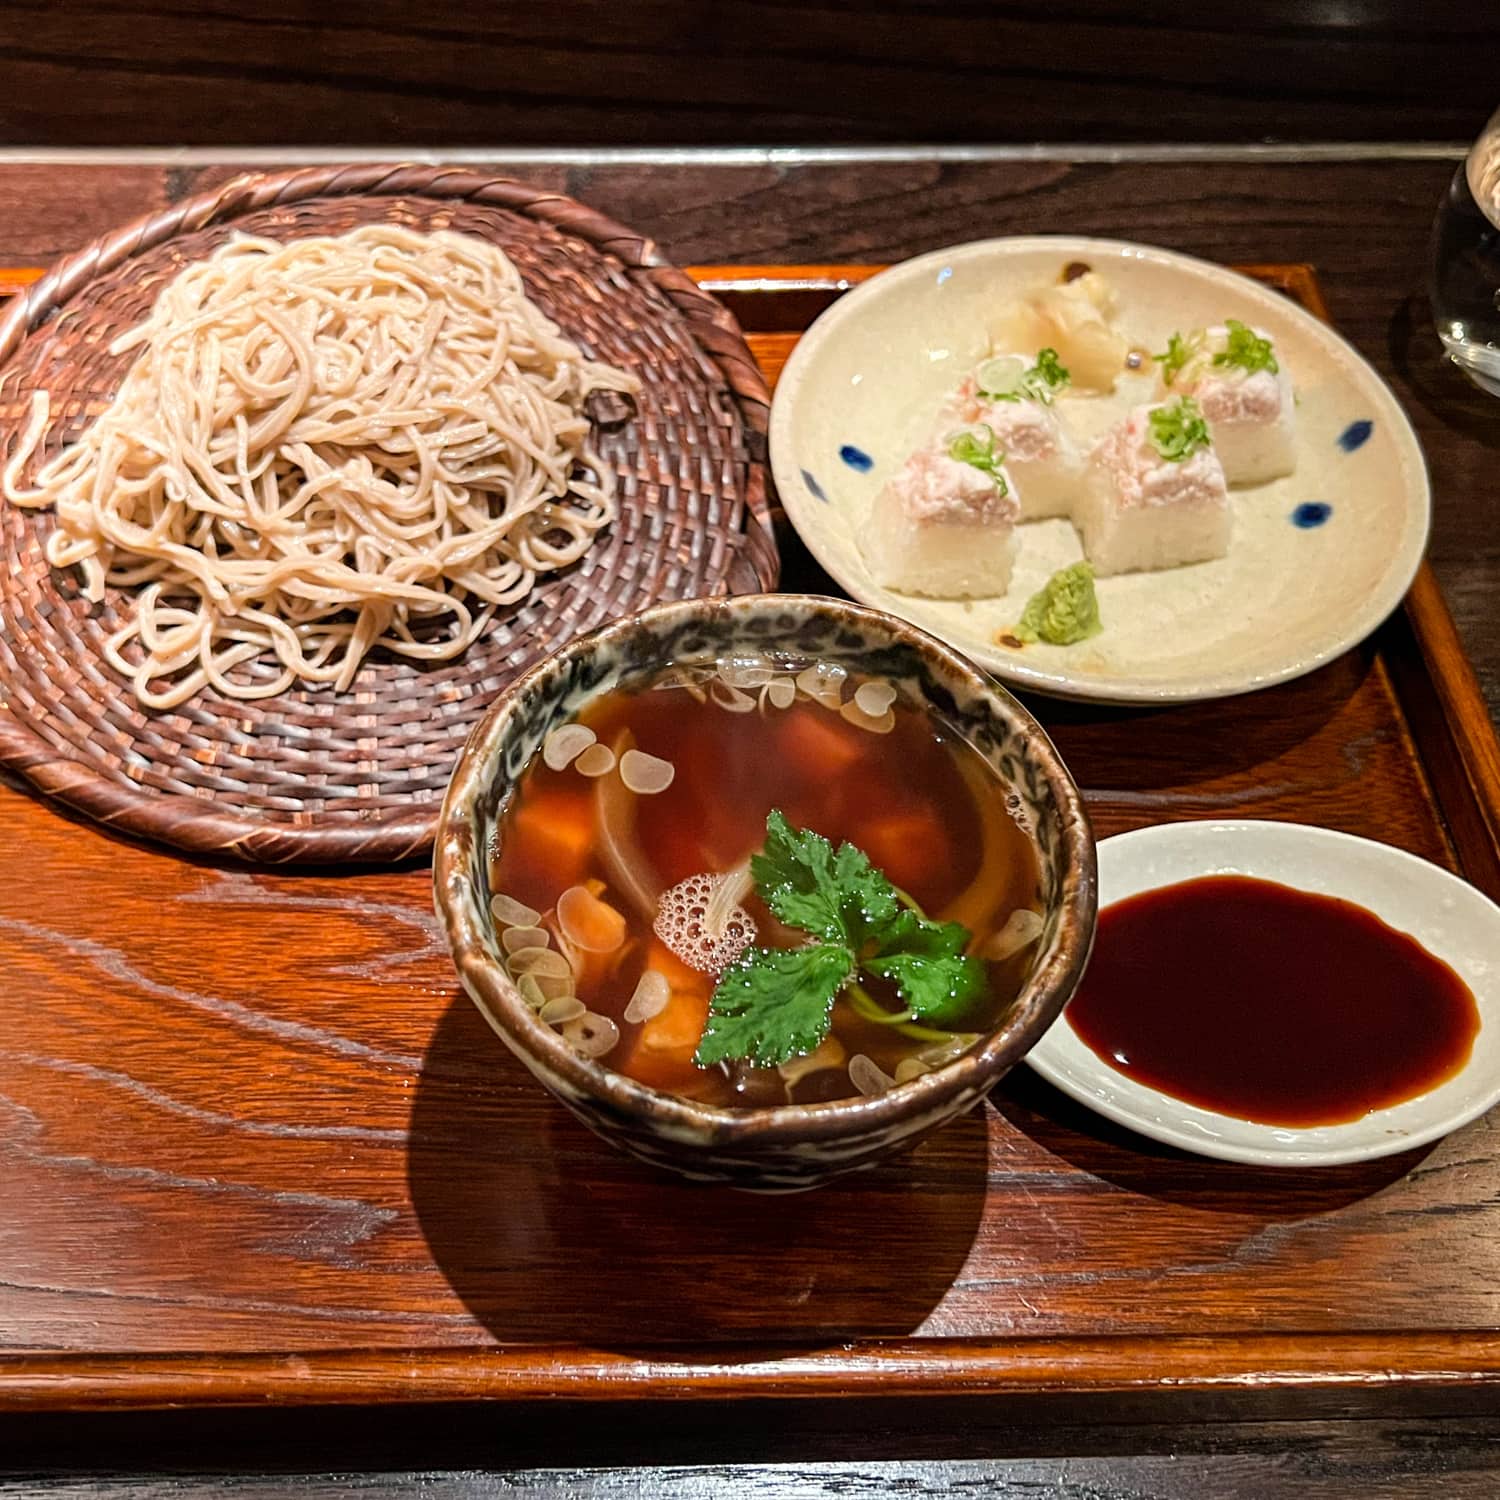 Soba noodles and sushi at Tei-An, one of the best sushi restaurants in Dallas